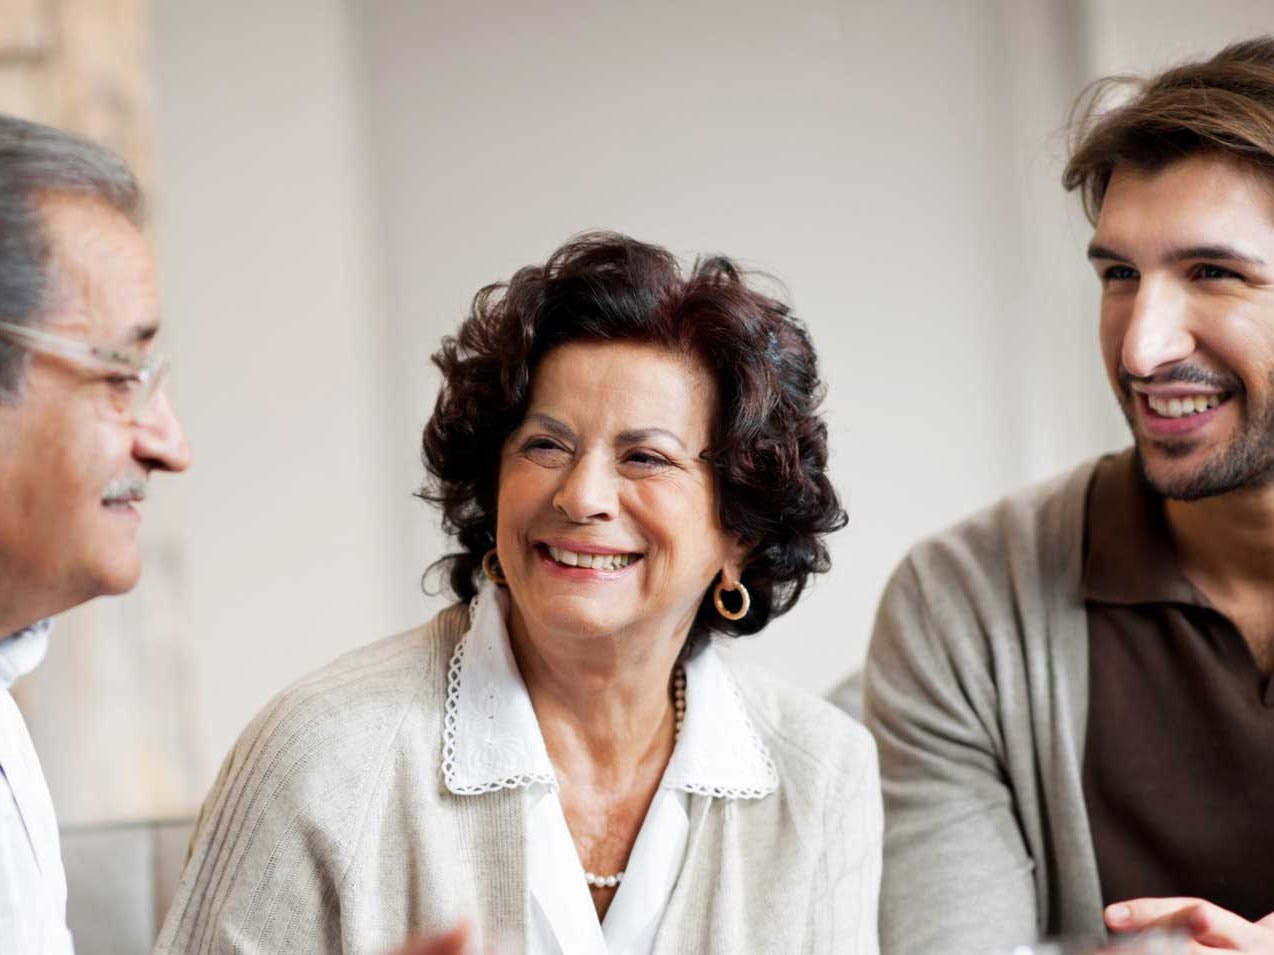 Australians are being encouraged to start conversations with elderly loved ones during National Advanced Care Planning Week this week [Source: Advanced Care Planning Australia]
